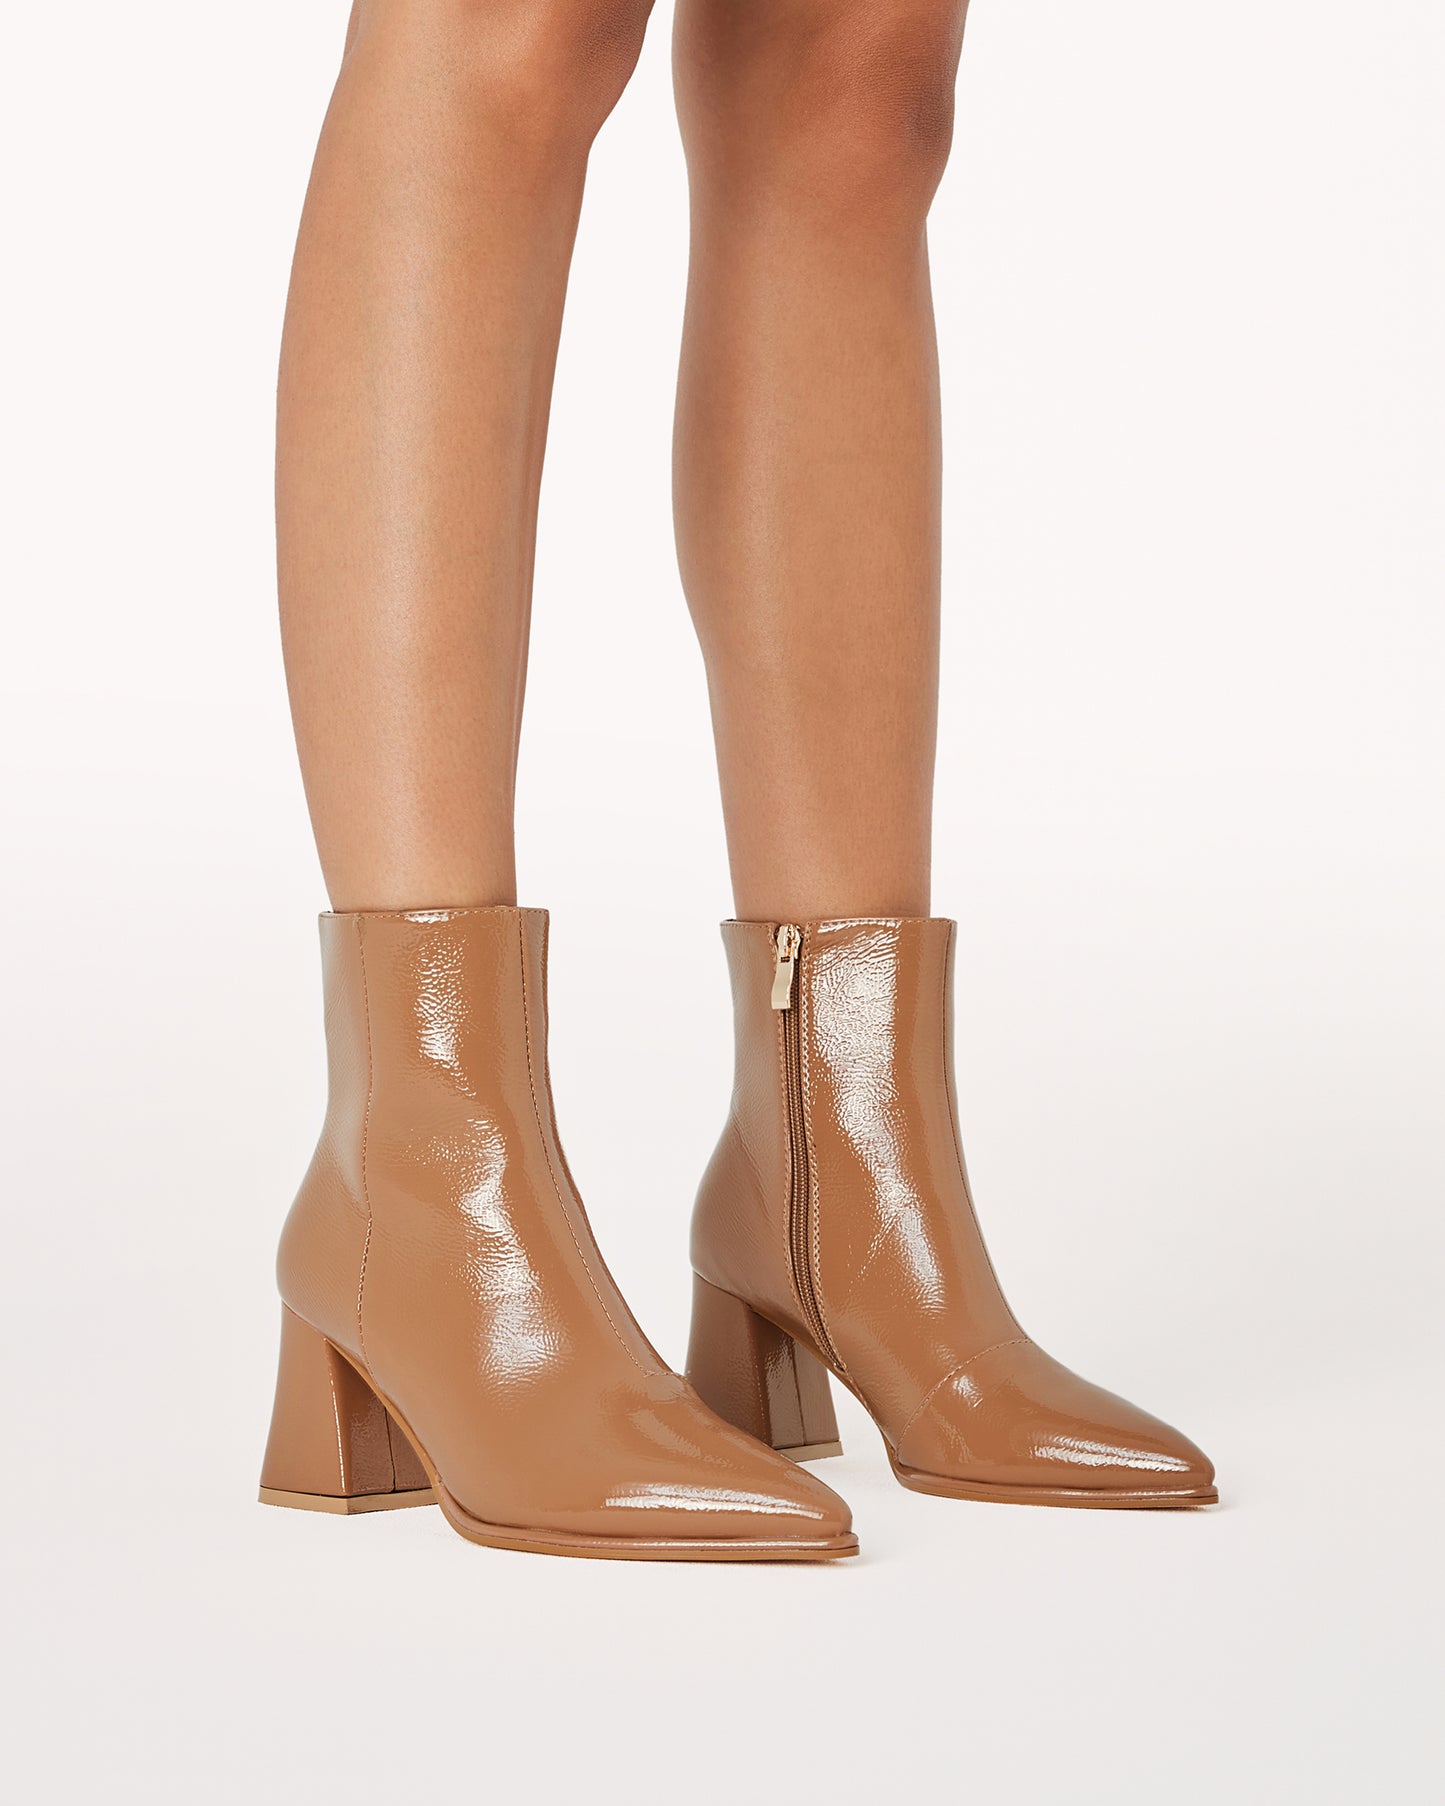 Chic ankle boot in a toffee crinkle patent and statement triangular block heel.